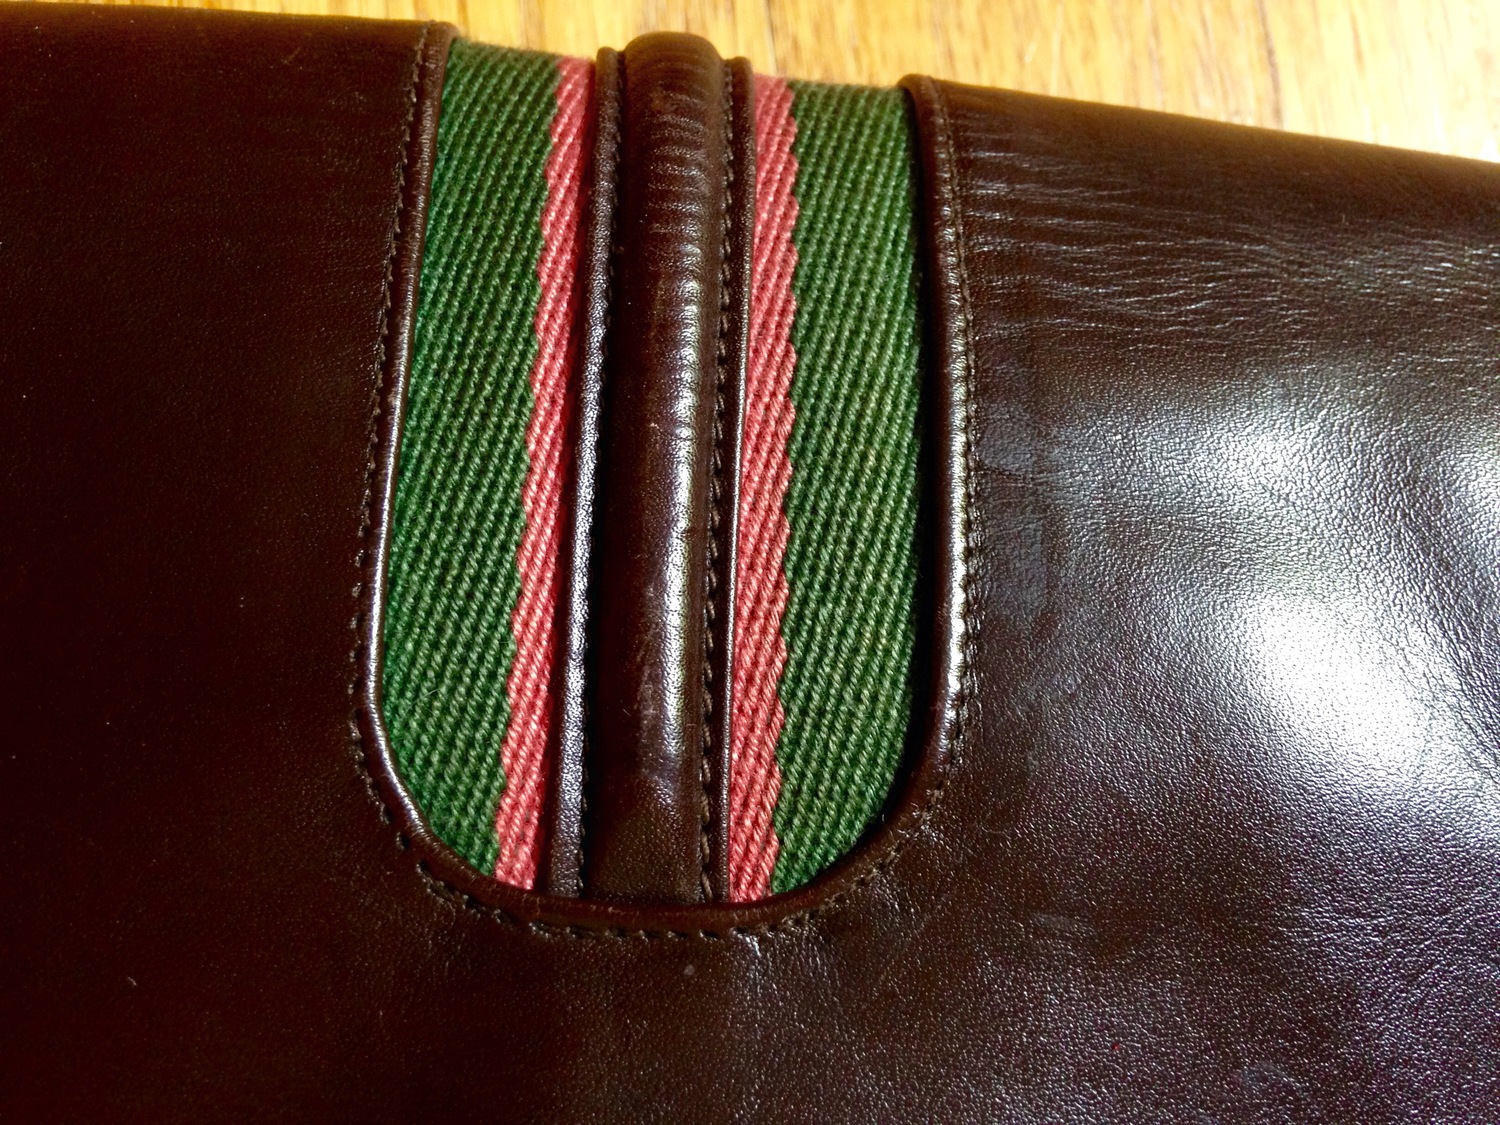 Vintage Gucci Brown Suede Clutch Purse With Red and Green 